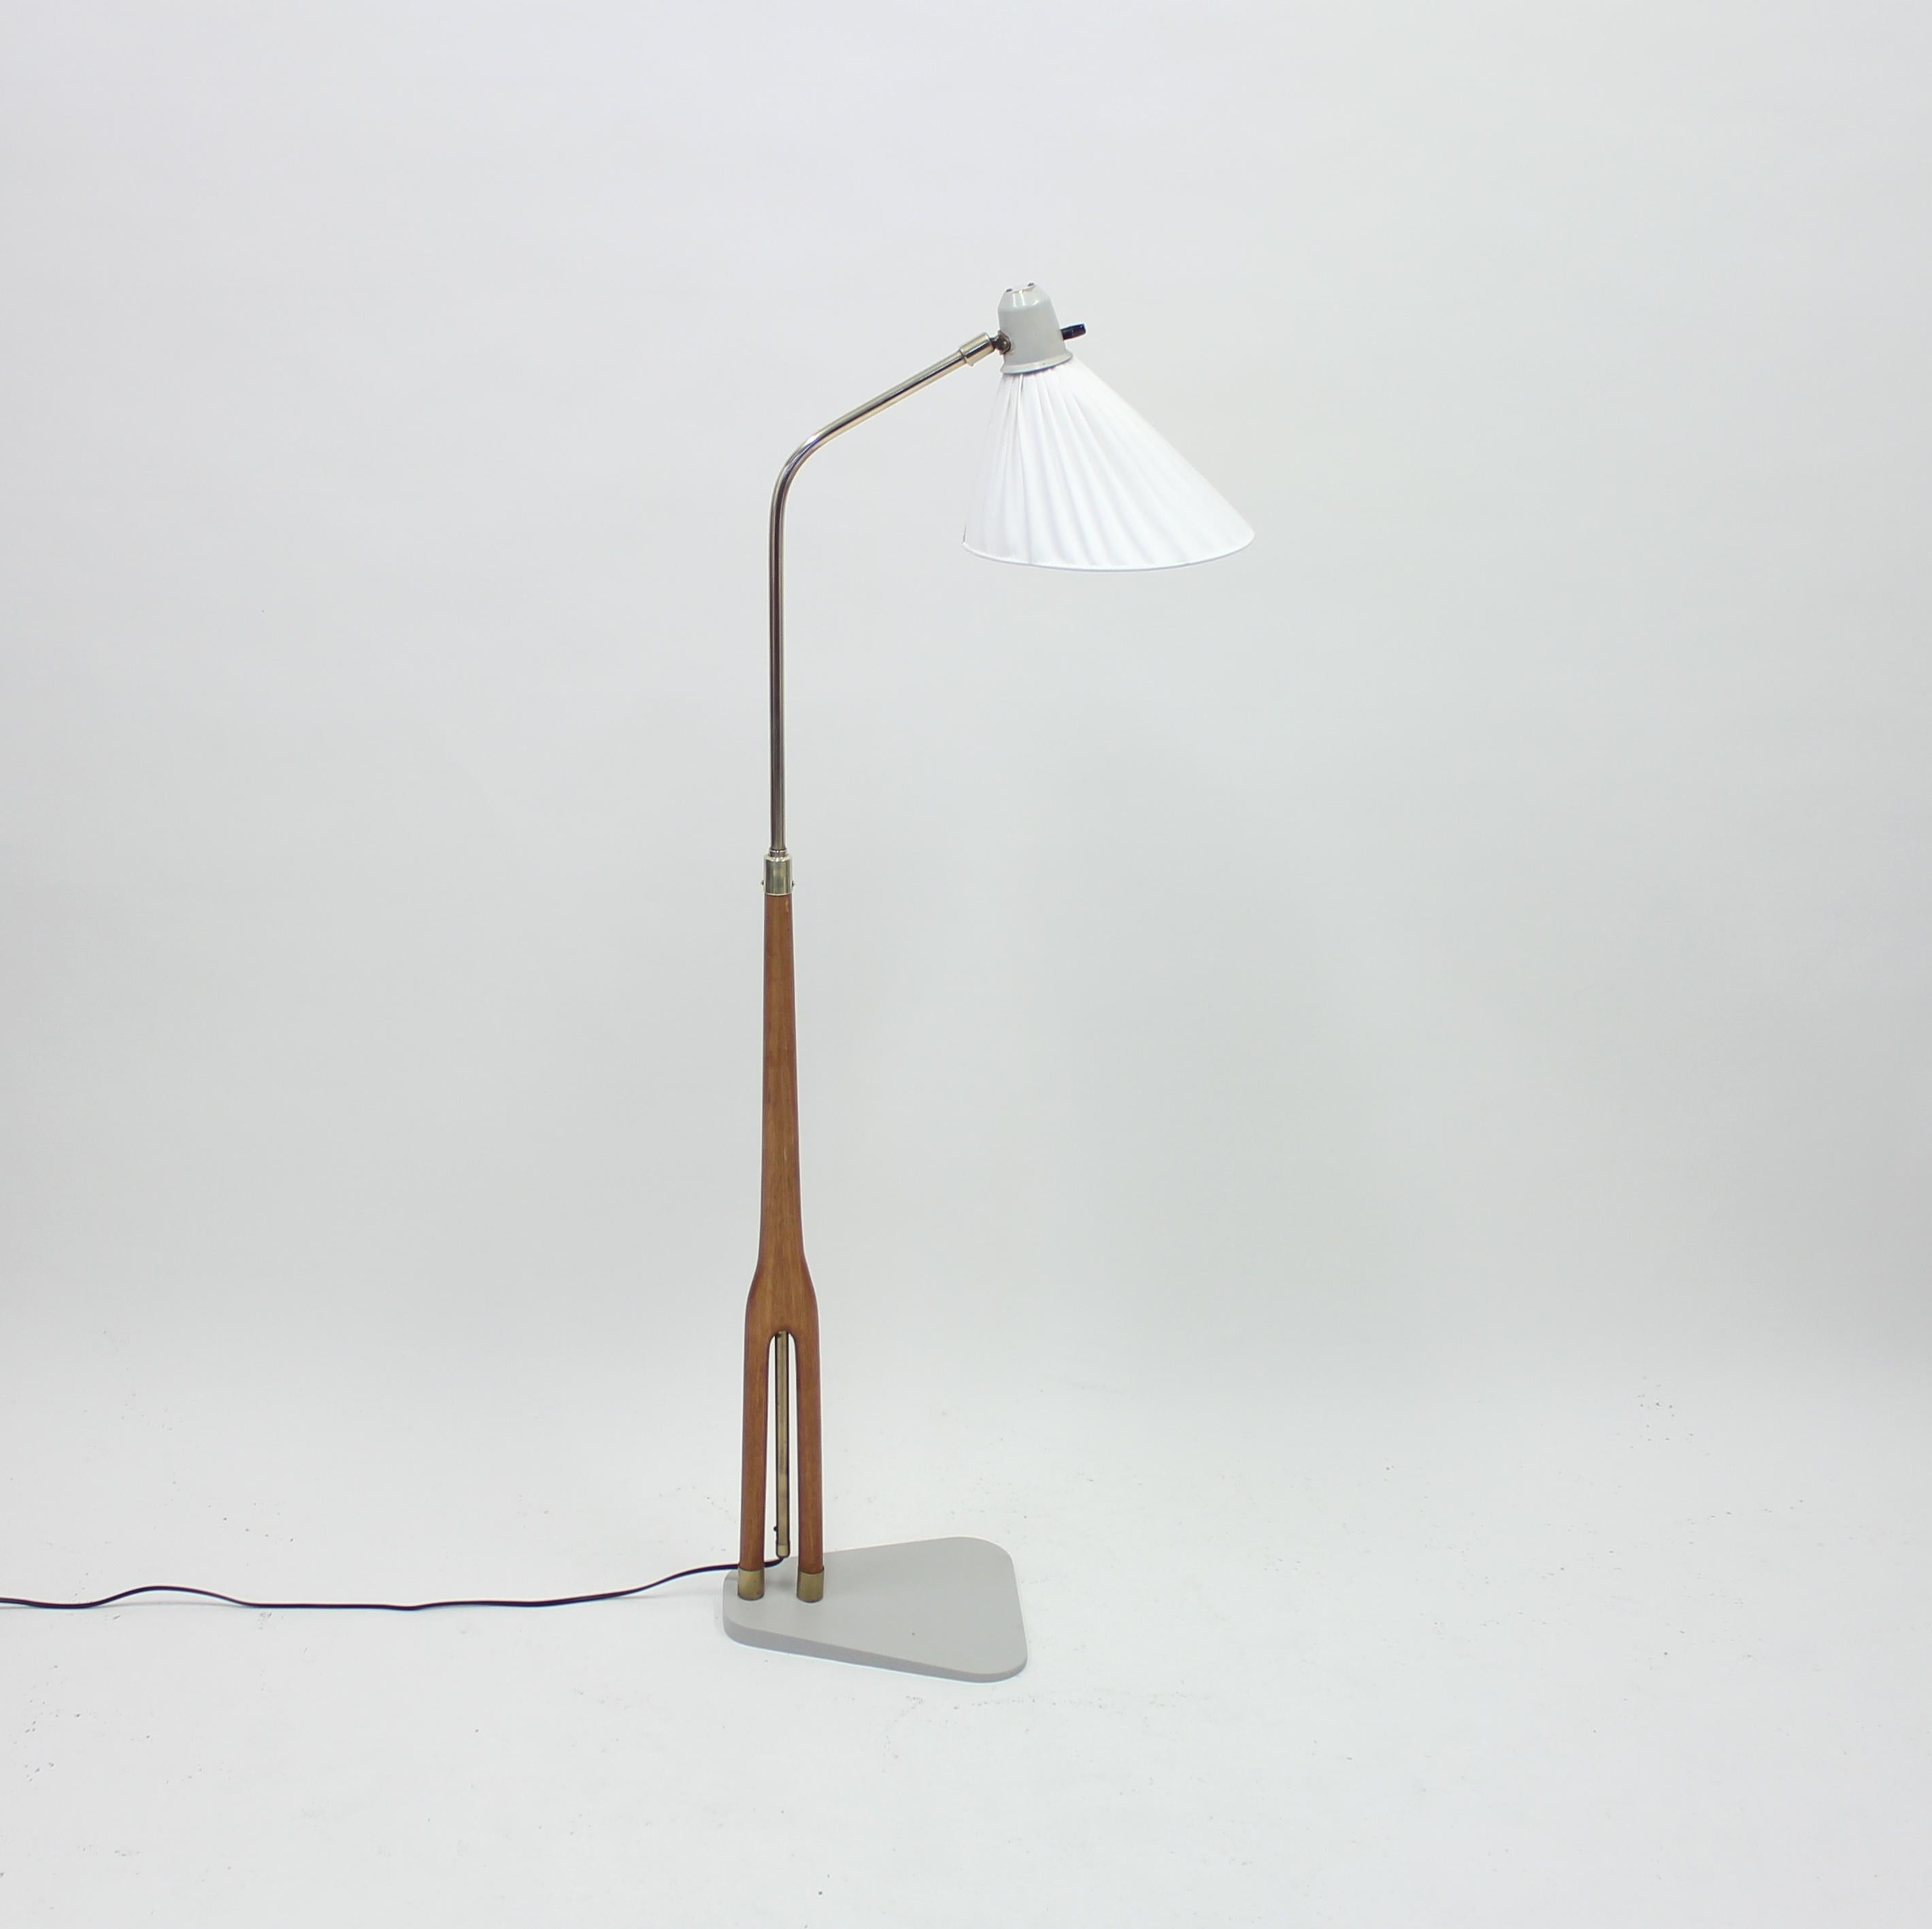 Very rare height adjustable floor lamp (between 123-143 cm) designed by Hans Bergström for ASEA in the 1950s. Newly grey coated base according to the original design. Shade with new fabric. Very good condition with light ware consistent with age and